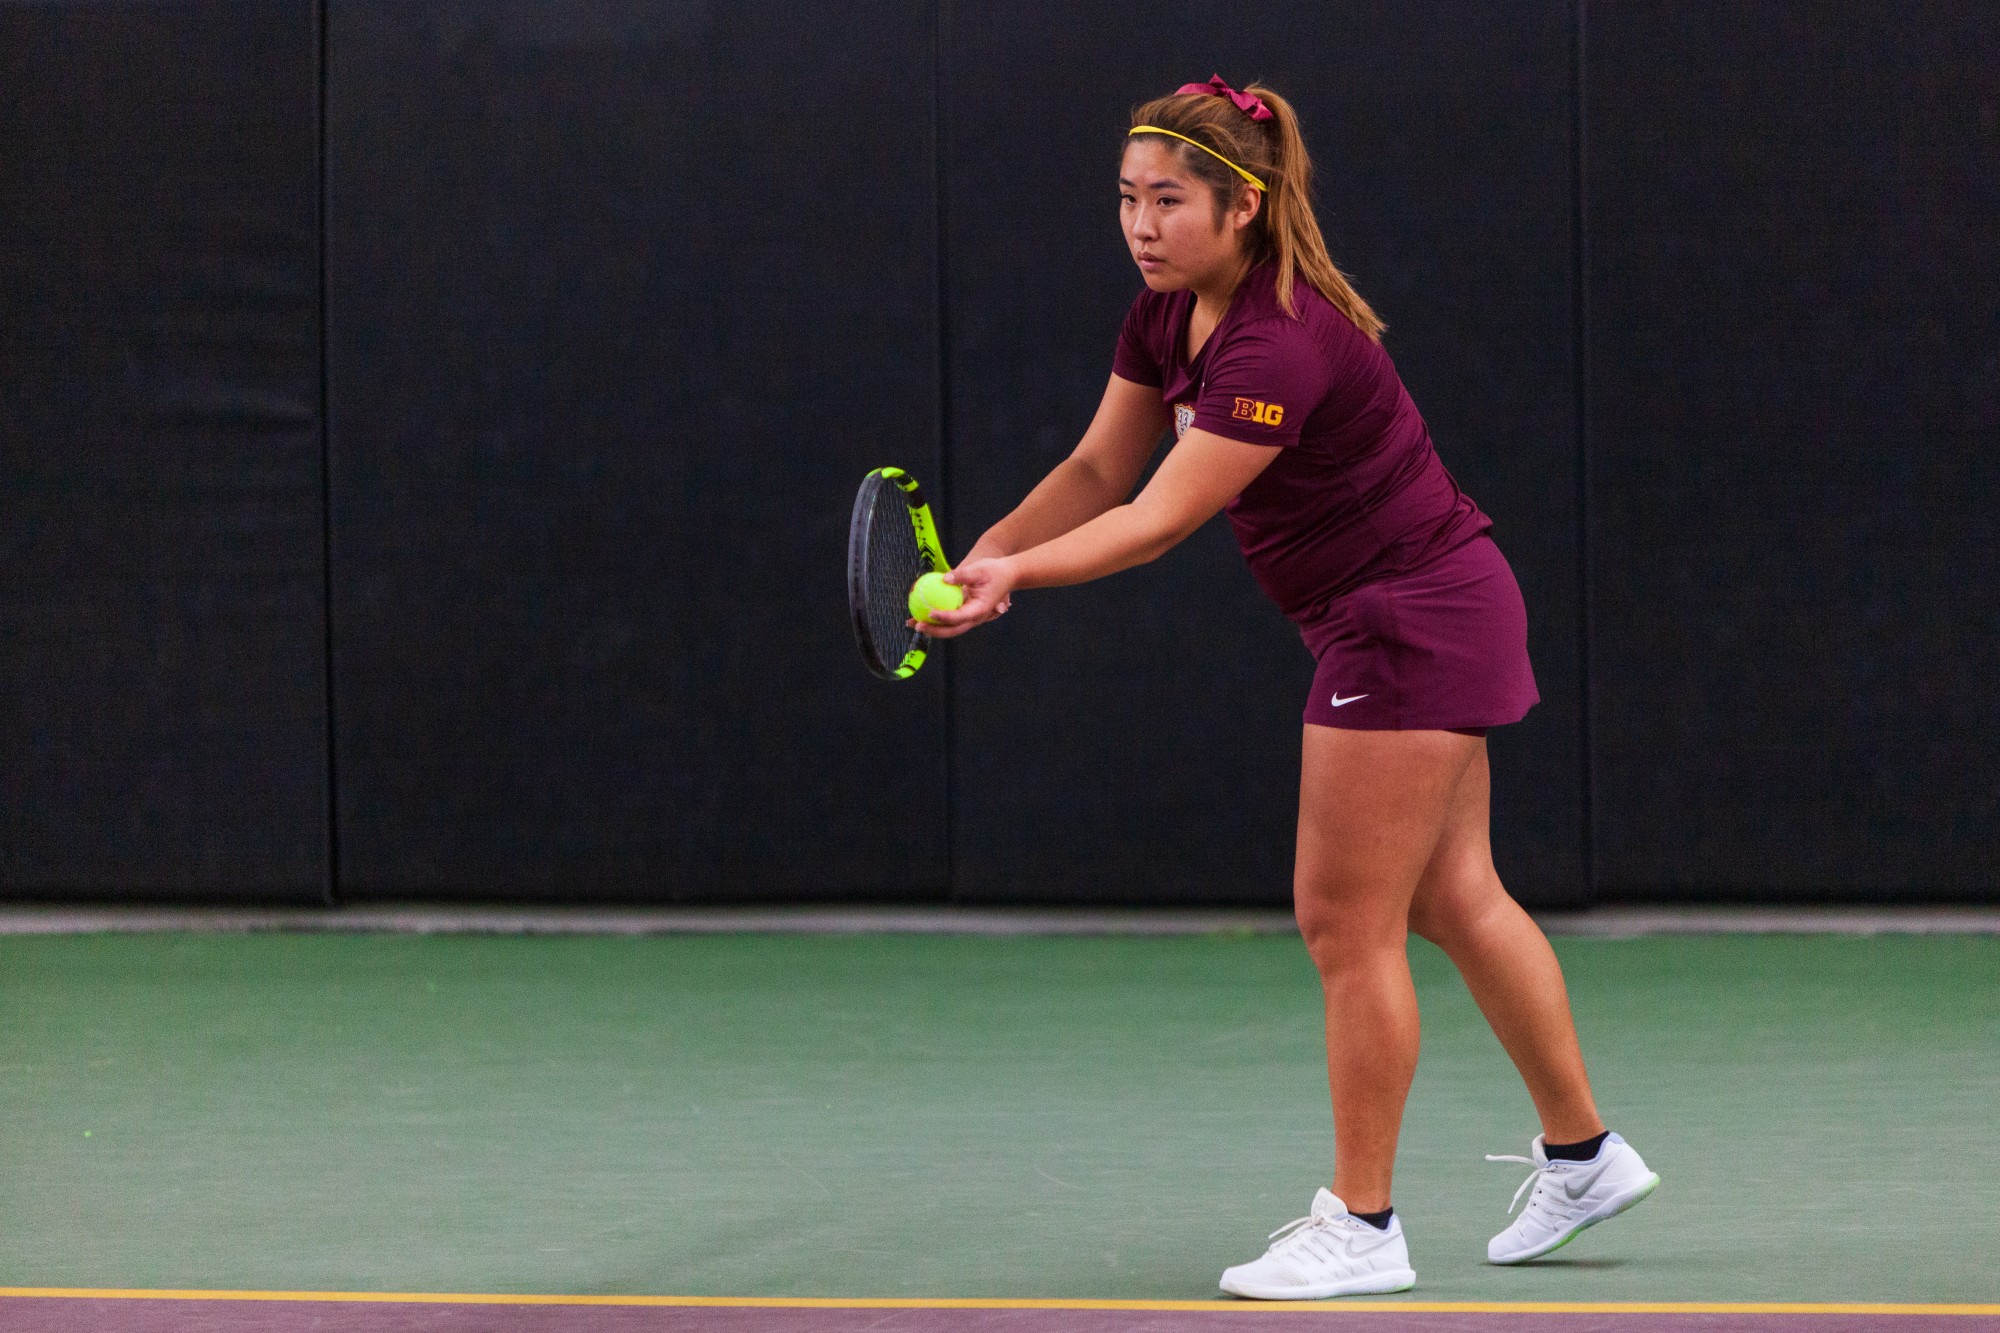 Gophers Junior Juliet Zhang prepares to serve at the Baseline Tennis Center on Friday, Feb. 7.